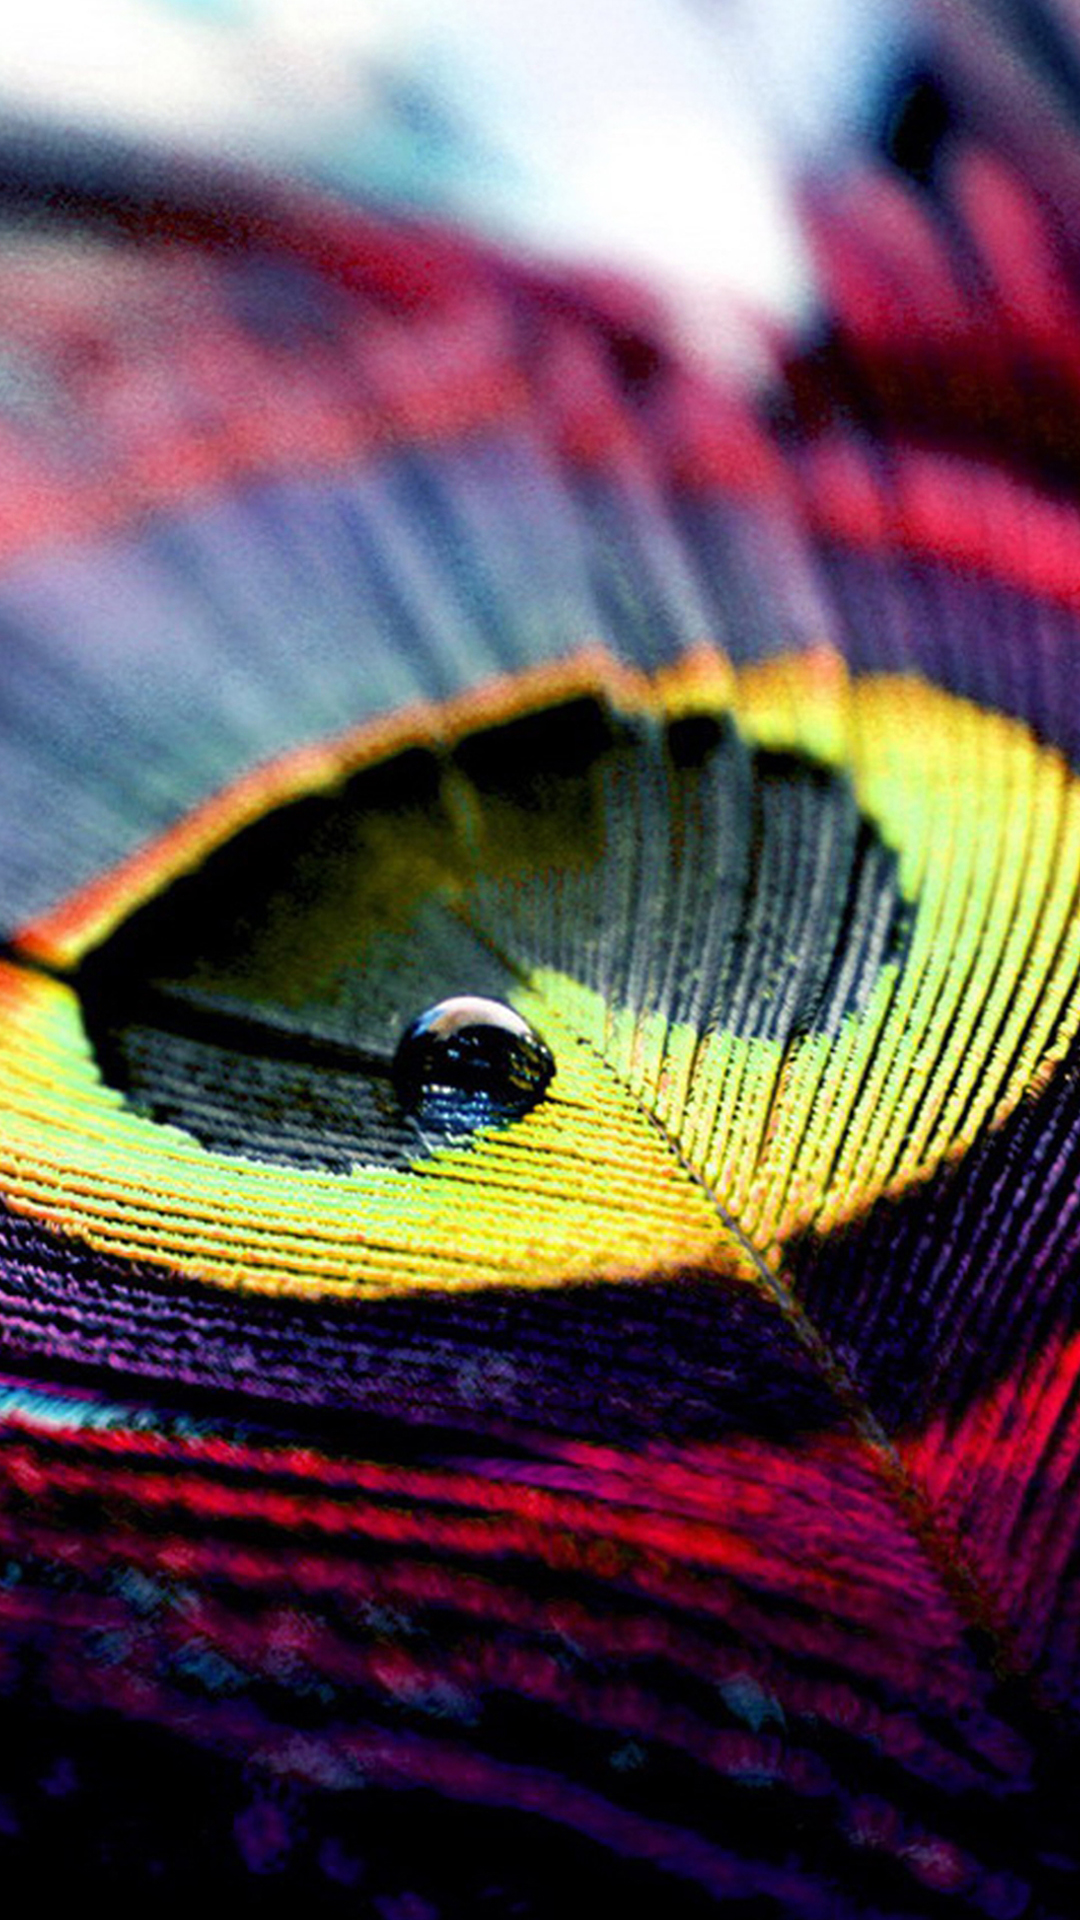 htc mobile wallpaper,feather,macro photography,purple,close up,violet